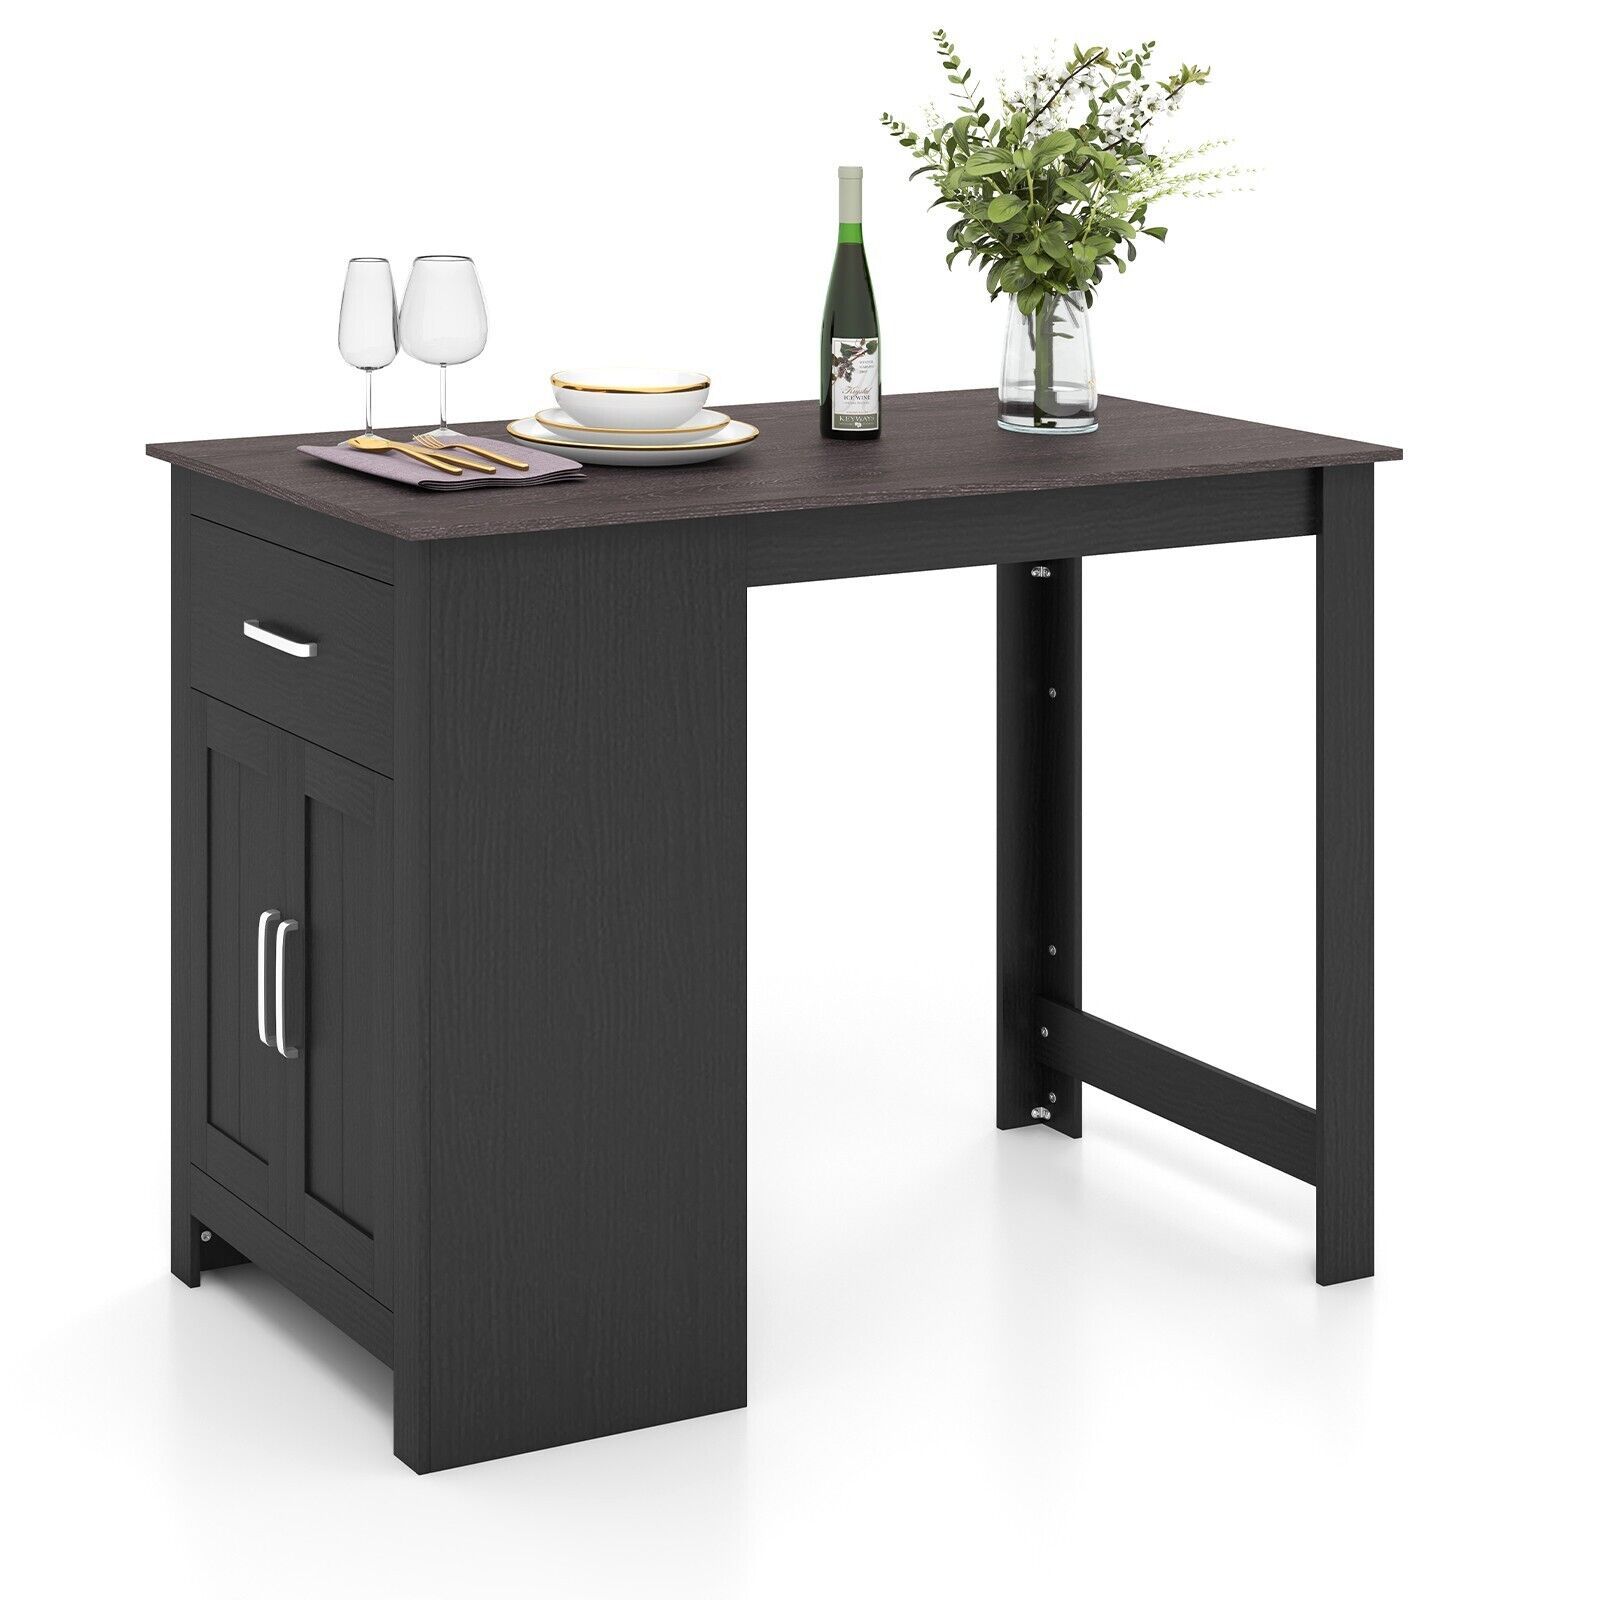 Maximize Your Space: The Benefits of a Counter Height Kitchen Table with Storage